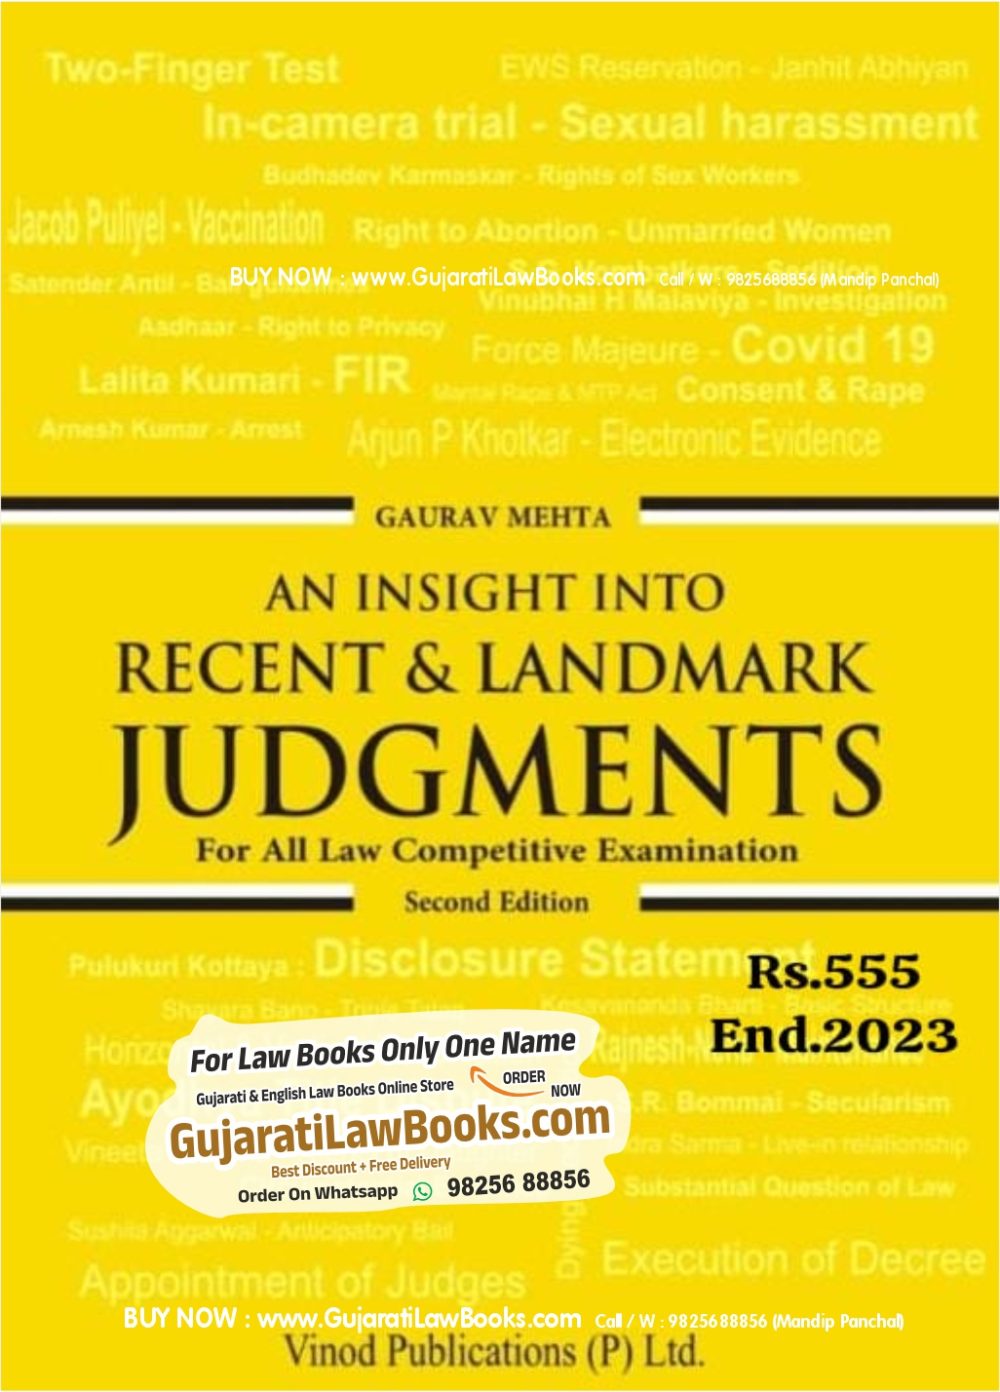 An Insight into Recent & Landmark Judgements - For All Law Competitive Examination - Latest 2nd Edition September 2023